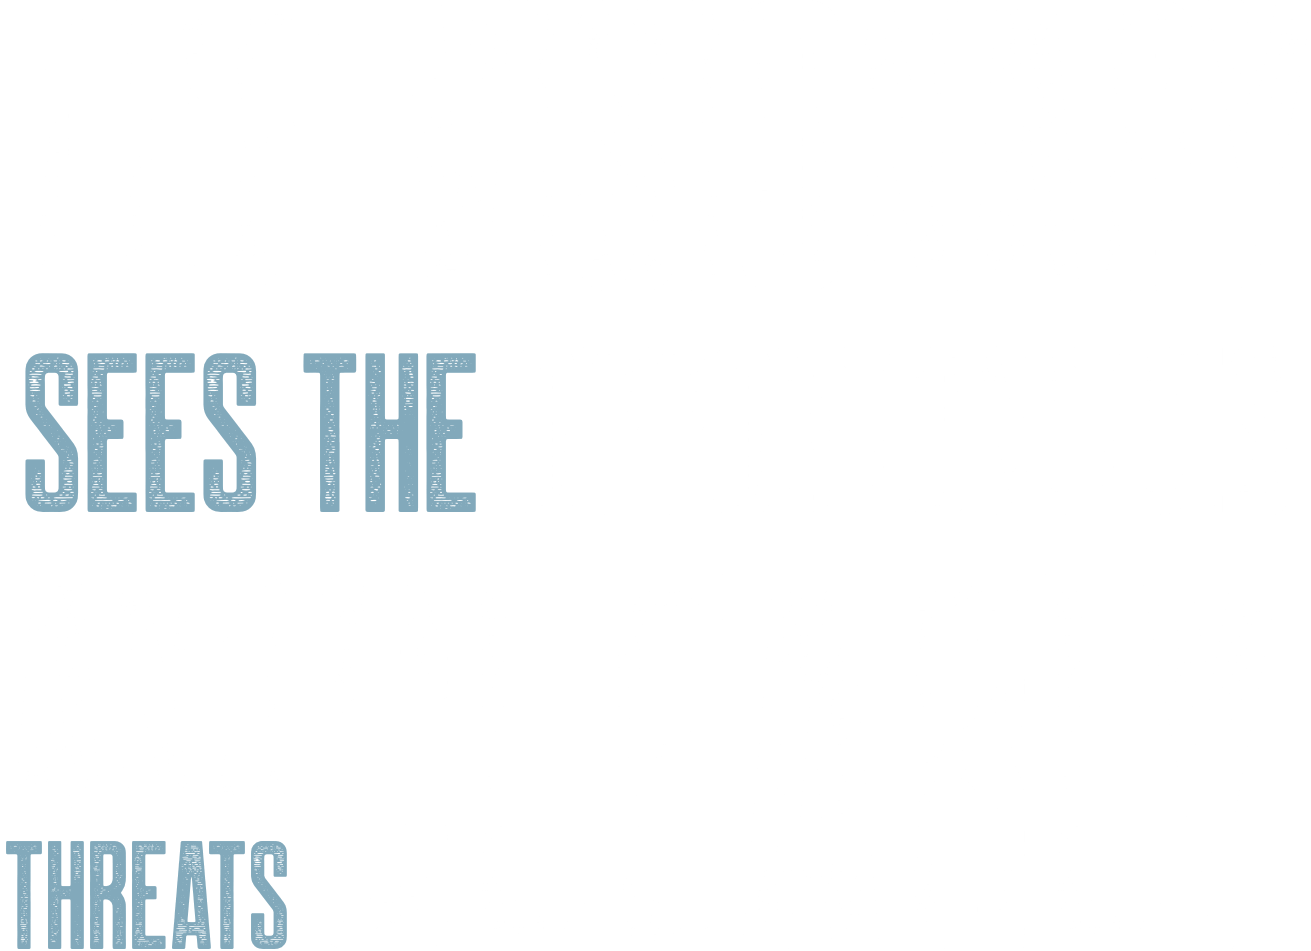 but the visionary sees the opportunity and threats clearly